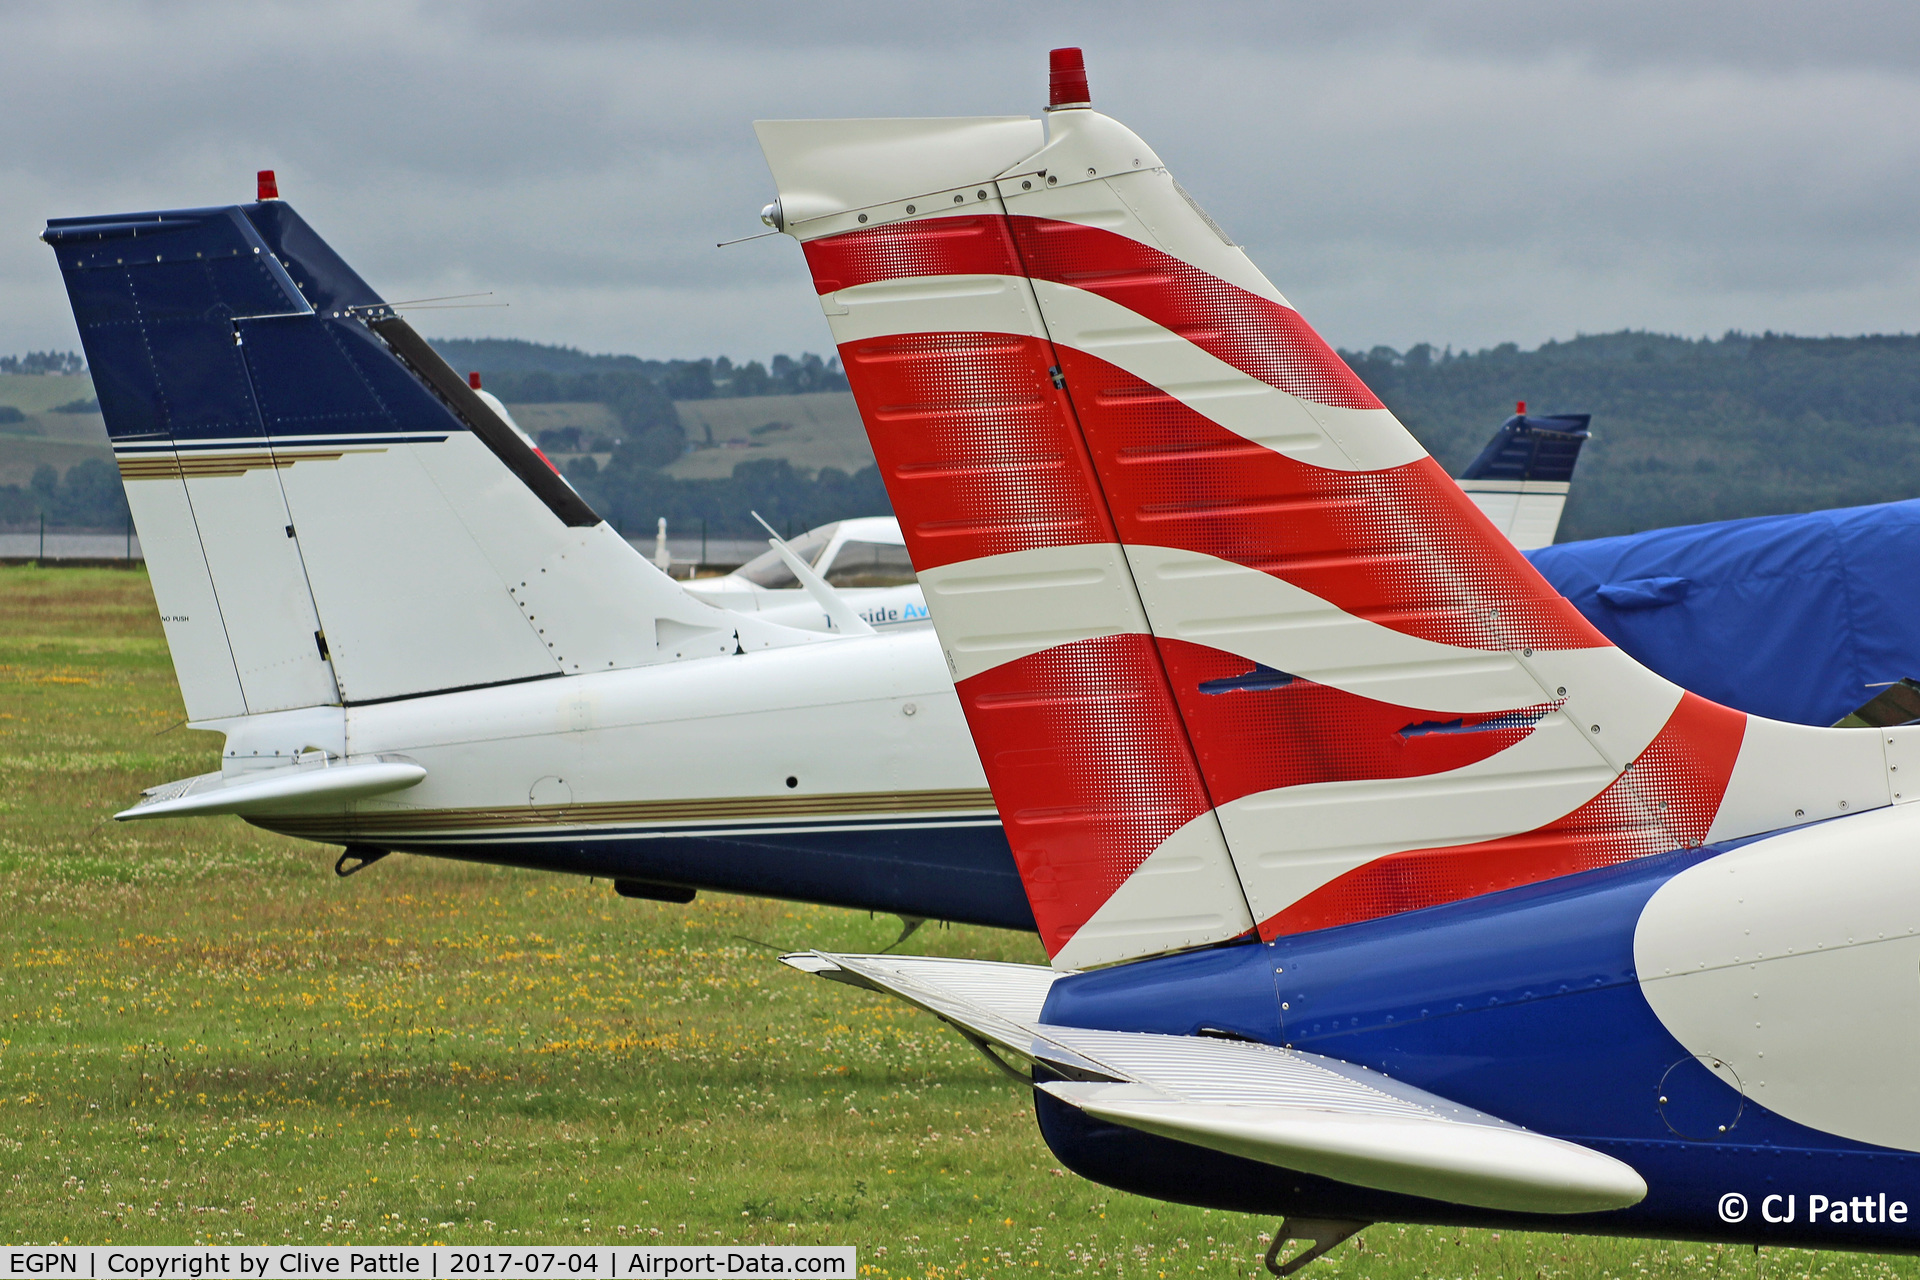 Dundee Airport, Dundee, Scotland United Kingdom (EGPN) - PA-28 tails at Dundee EGPN